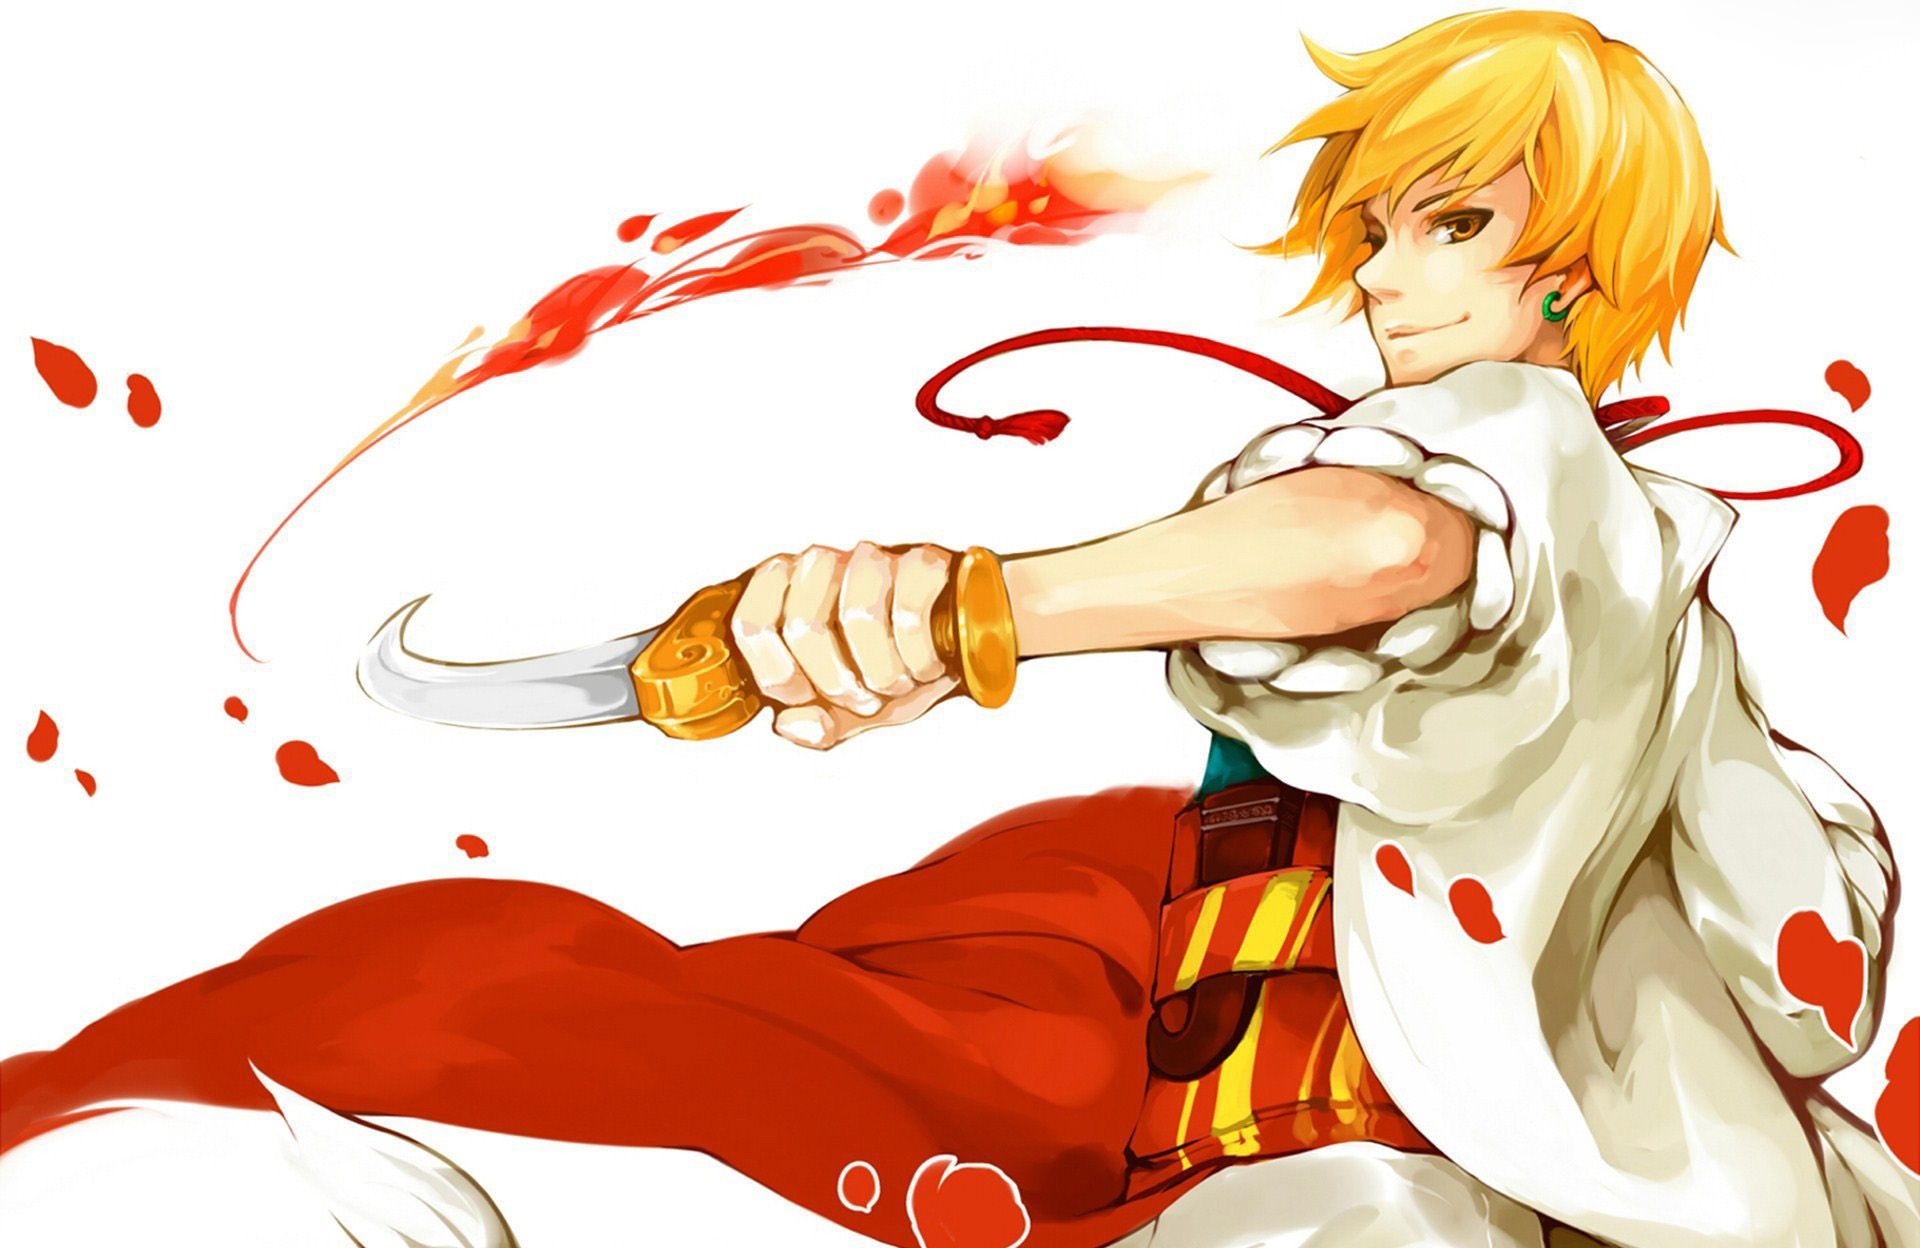 Anime Boy Free Download High Definition Wallpaper Anime Boy With Blonde Hair